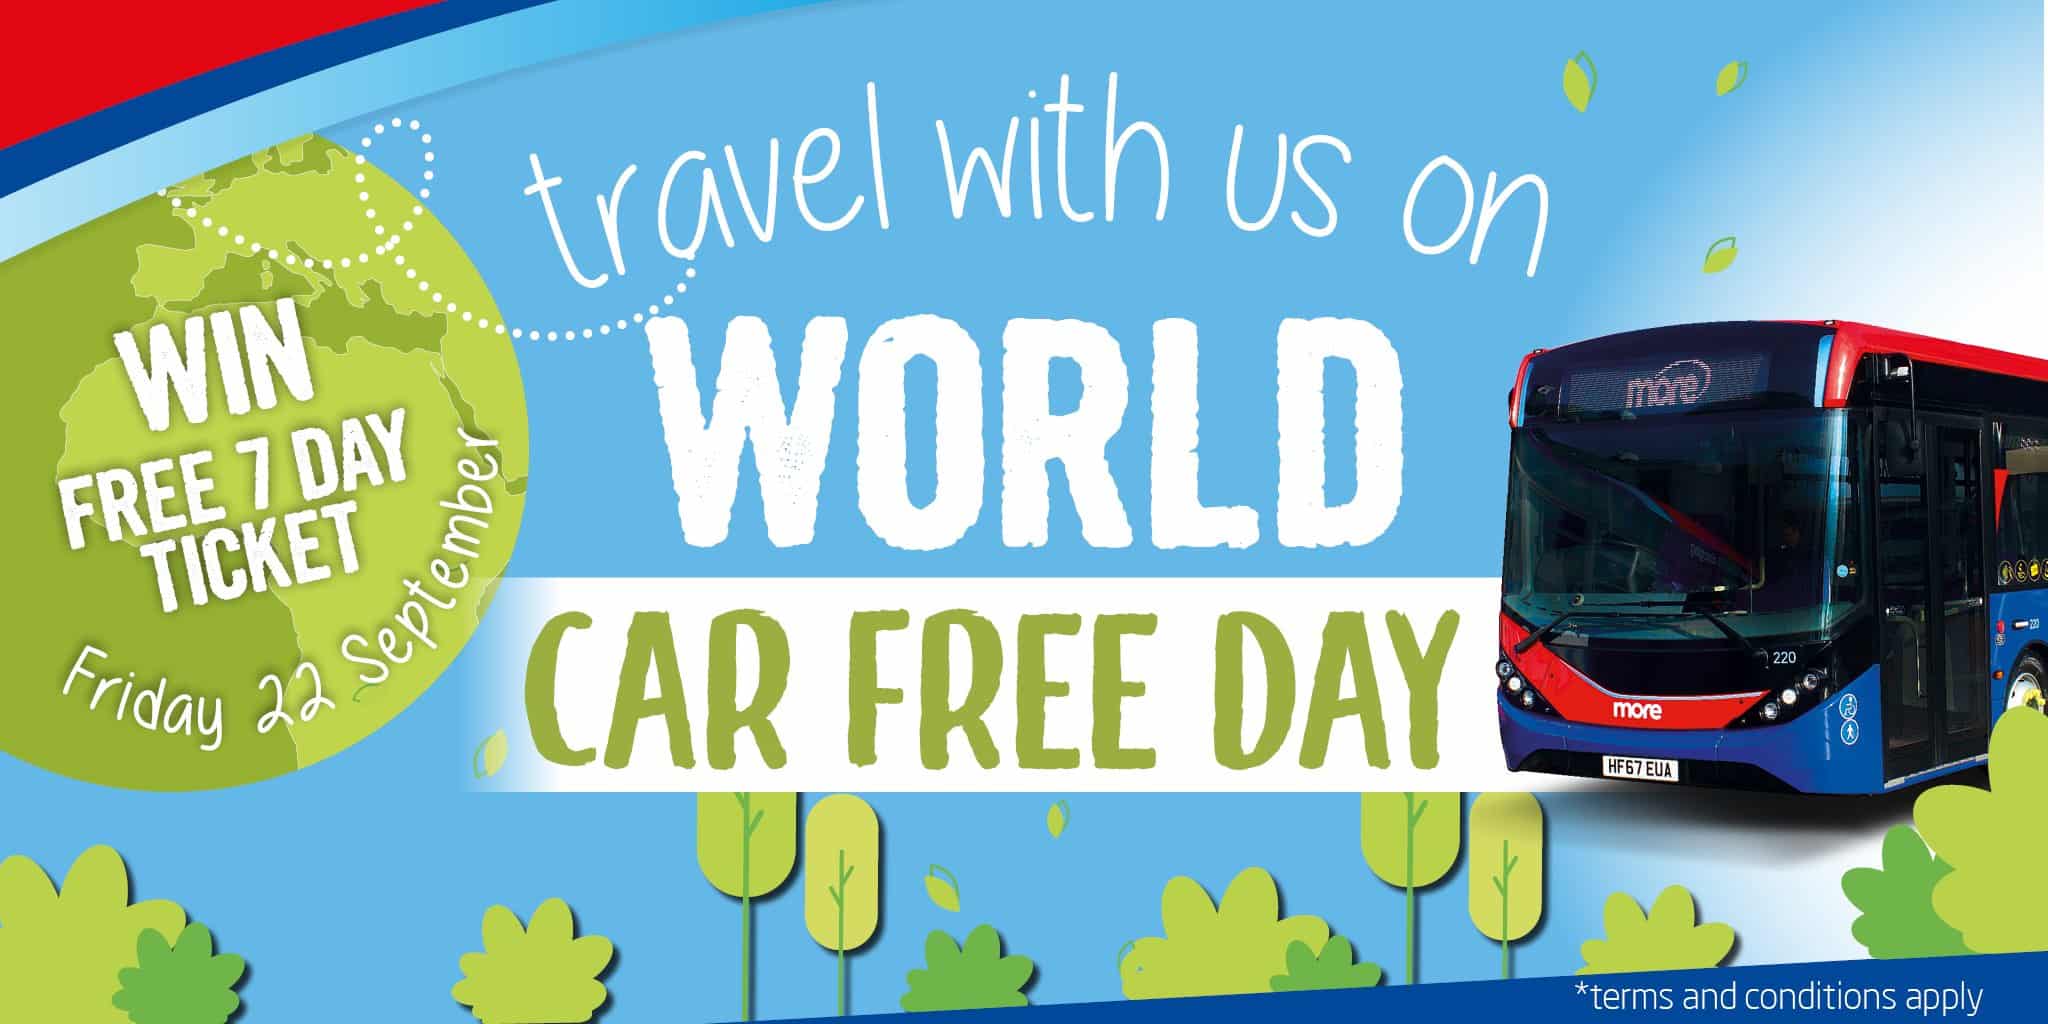 Travel with us on World Car Free Day. 